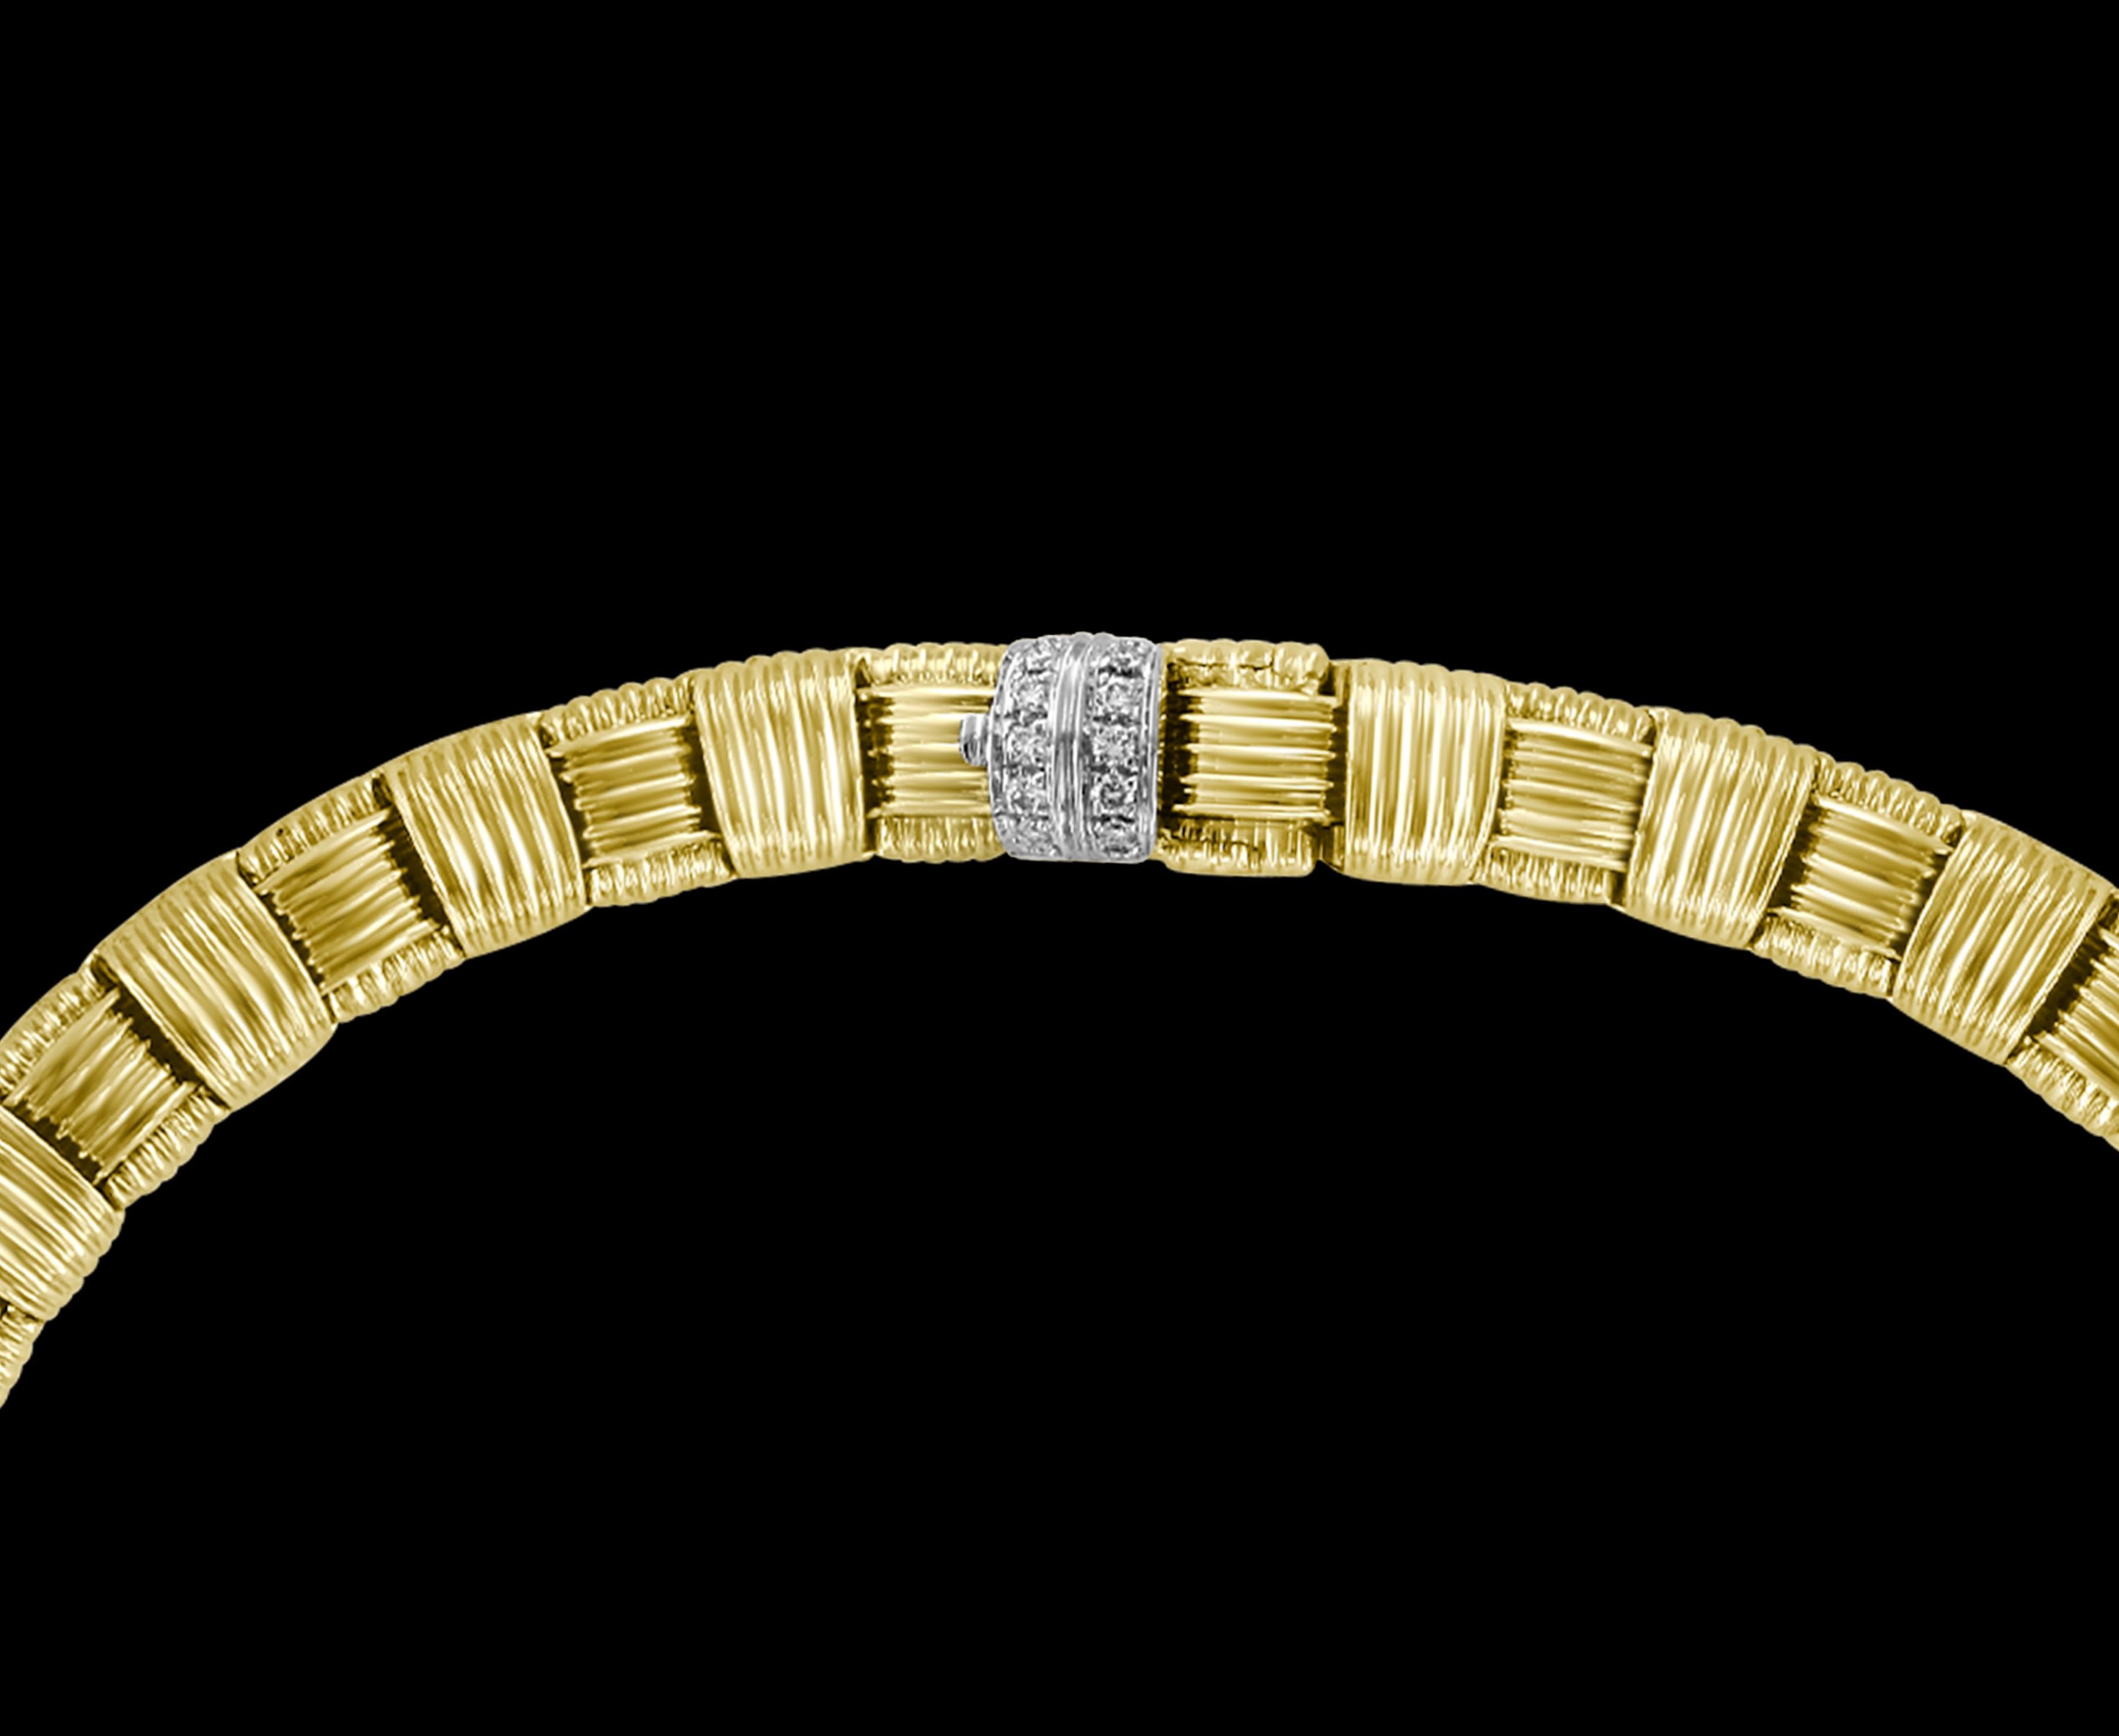 A statement of true, classic elegance, this 18k Roberto Coin Appasionata Necklace with Pave Diamond Clasp (.16ctw), is from his signature collection. The interlocking ribbed gold links, in a lovely basket-weave, provide flexibility with a